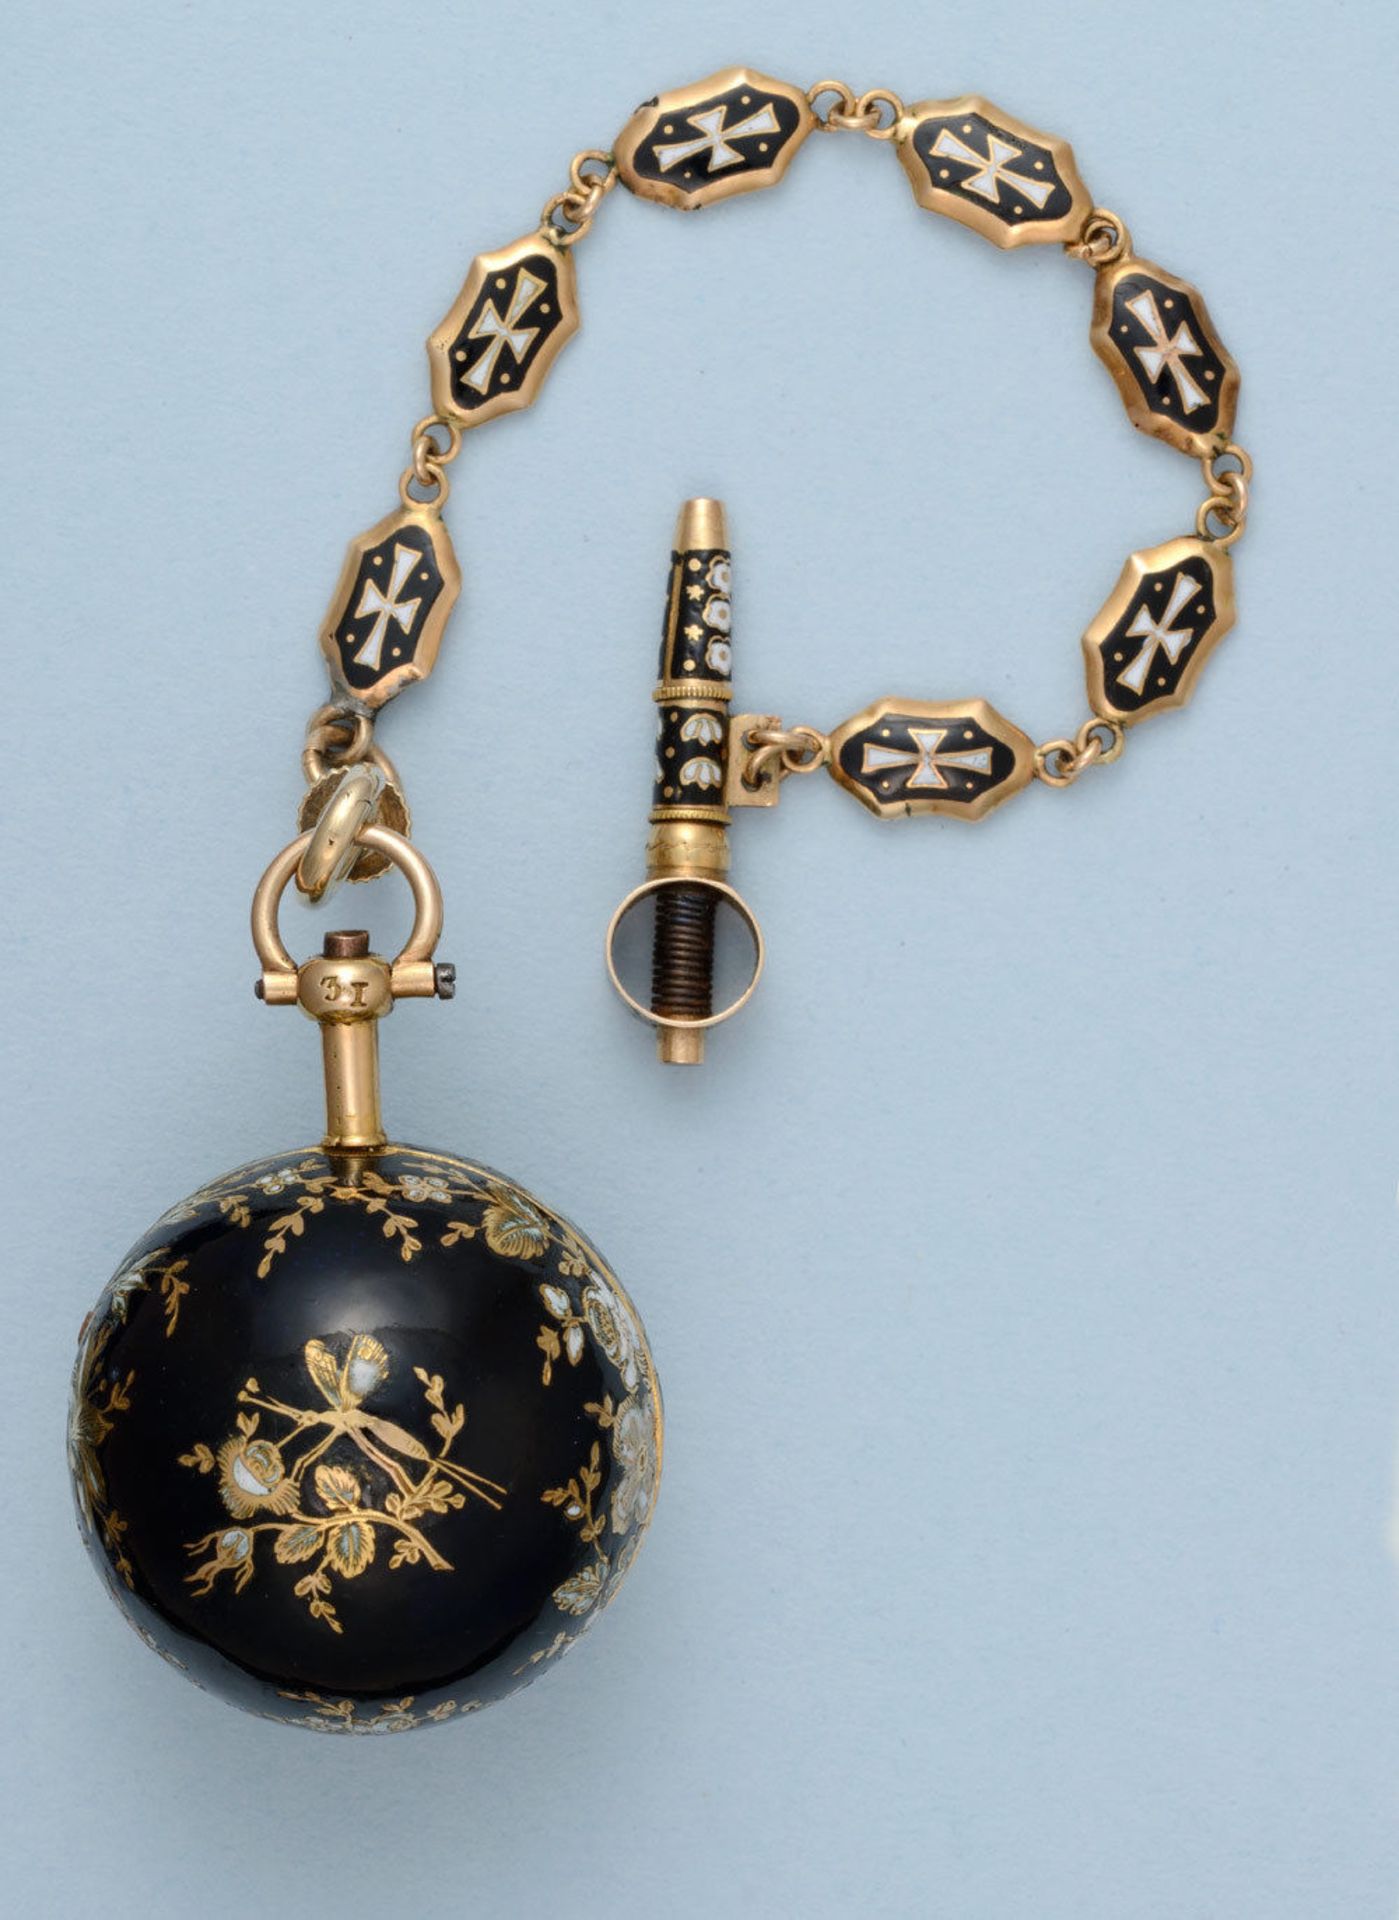 Gold and Enamel Verge Ball Watch and Chain - Image 3 of 7